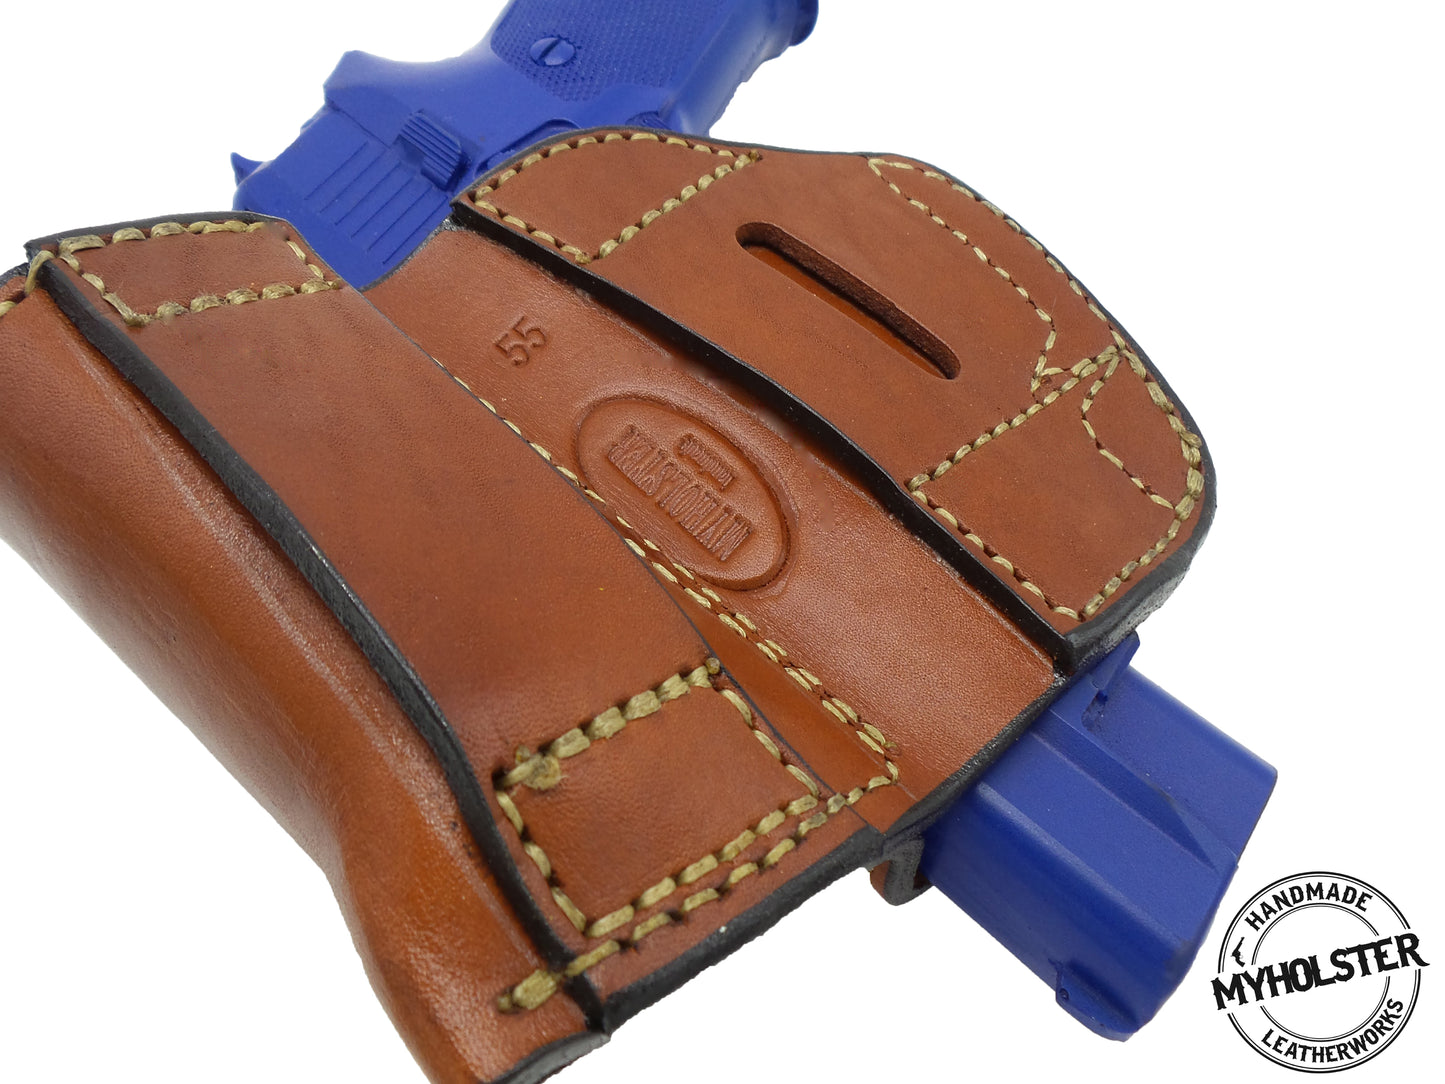 Sig Sauer P220 Belt Holster with Mag Pouch Leather Holster